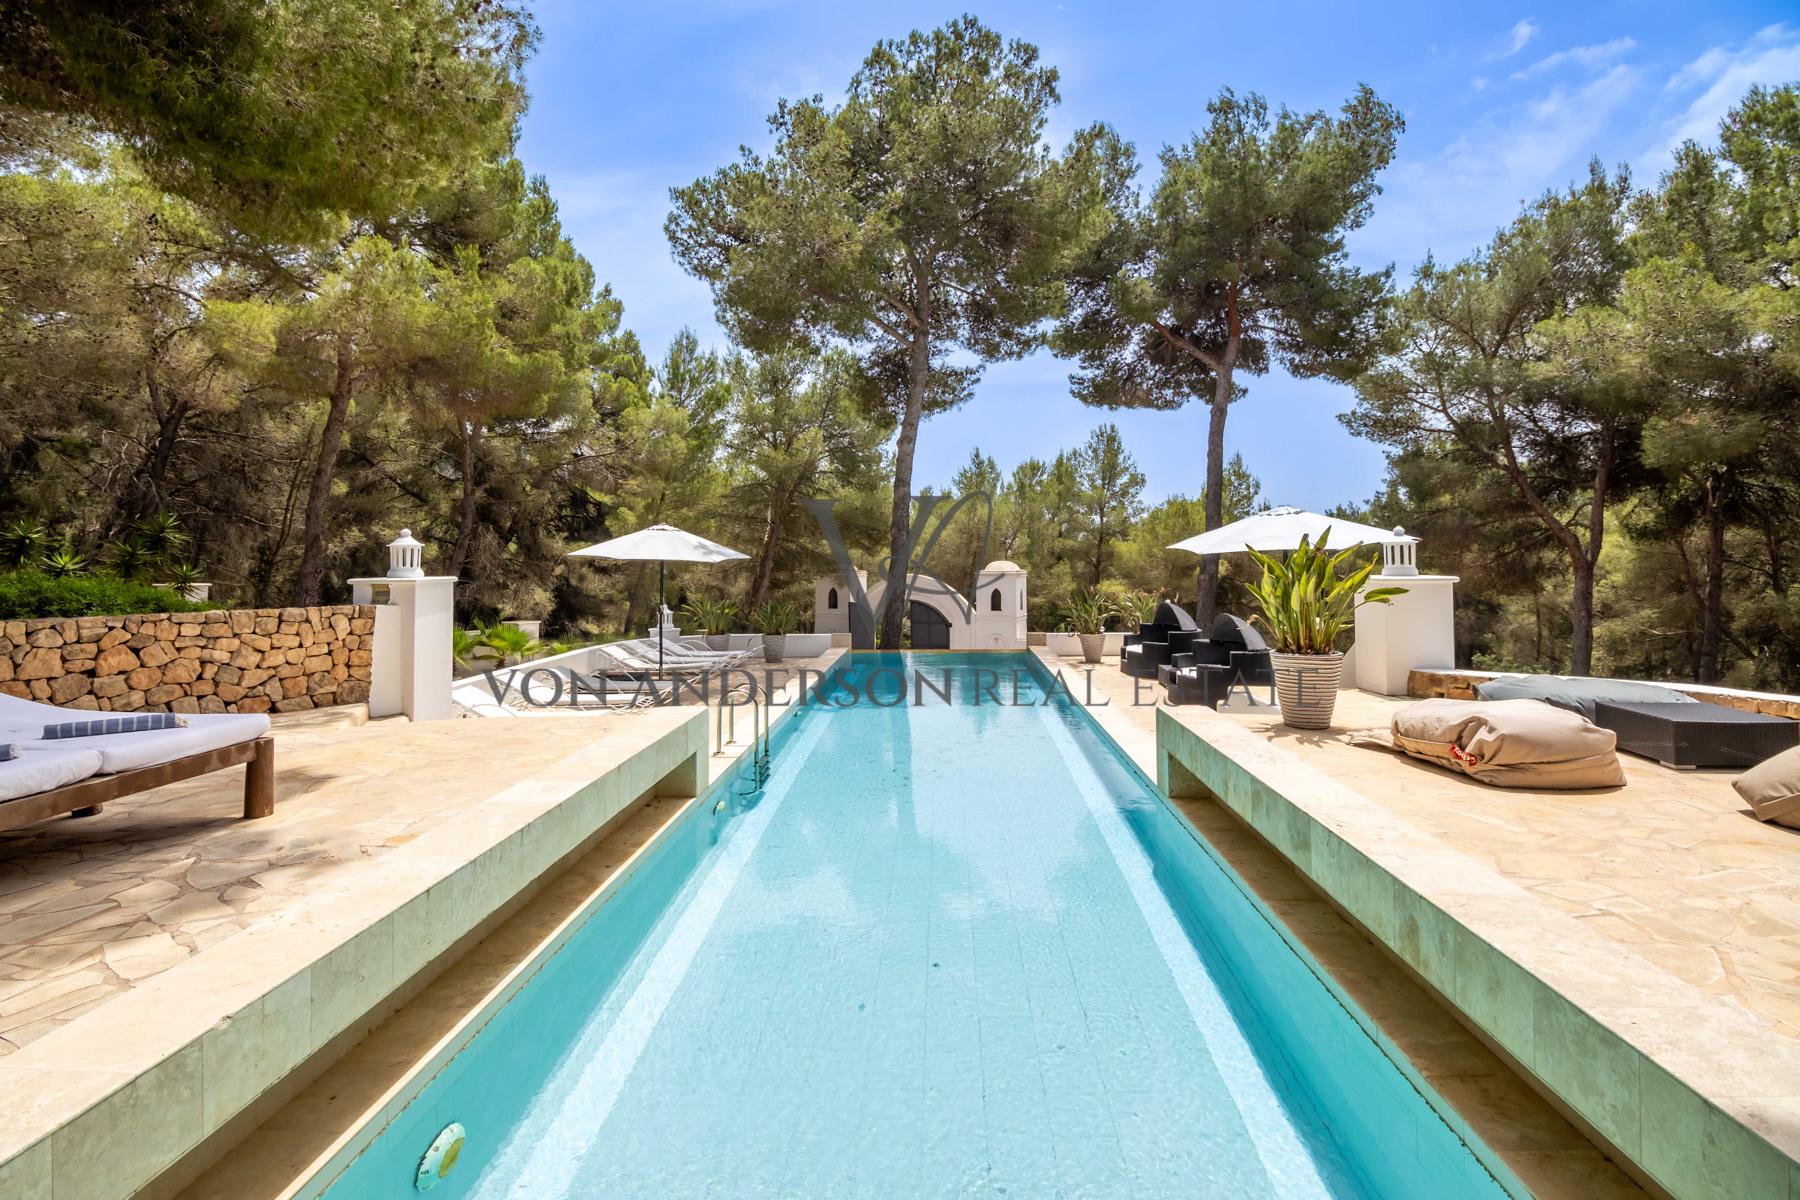 Stunning Villa with Tourist Rental License and Two Guest Annexes on Countryside Plot, ref. VA1036, for sale in Ibiza by Von Anderson Real Estate